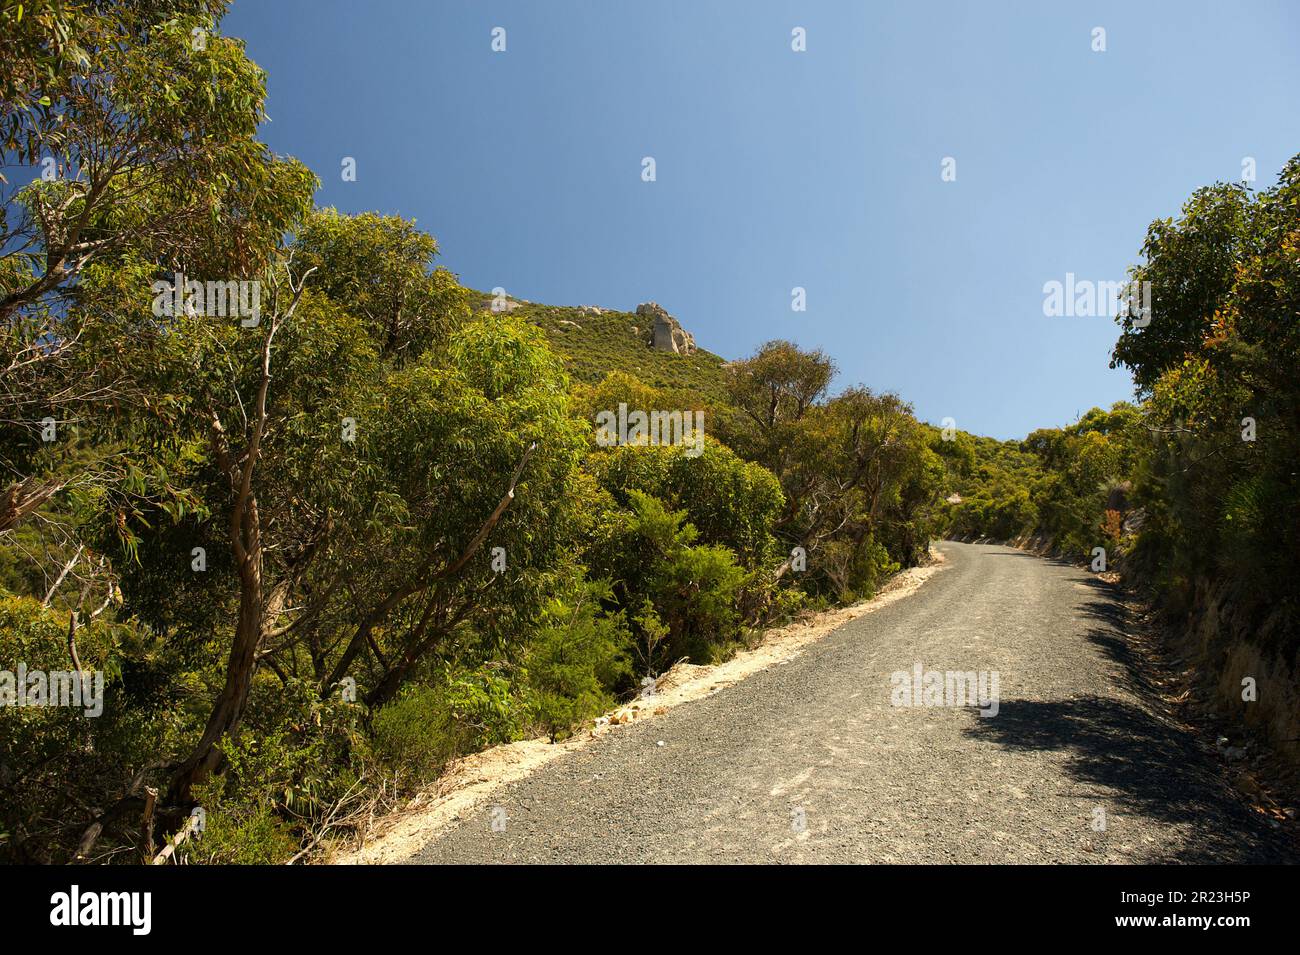 Mount Oberon is in Wilsons Promontory National Park, in Victoria, Australia. It has 180º views of the National Park, if you can make it to the top! Stock Photo